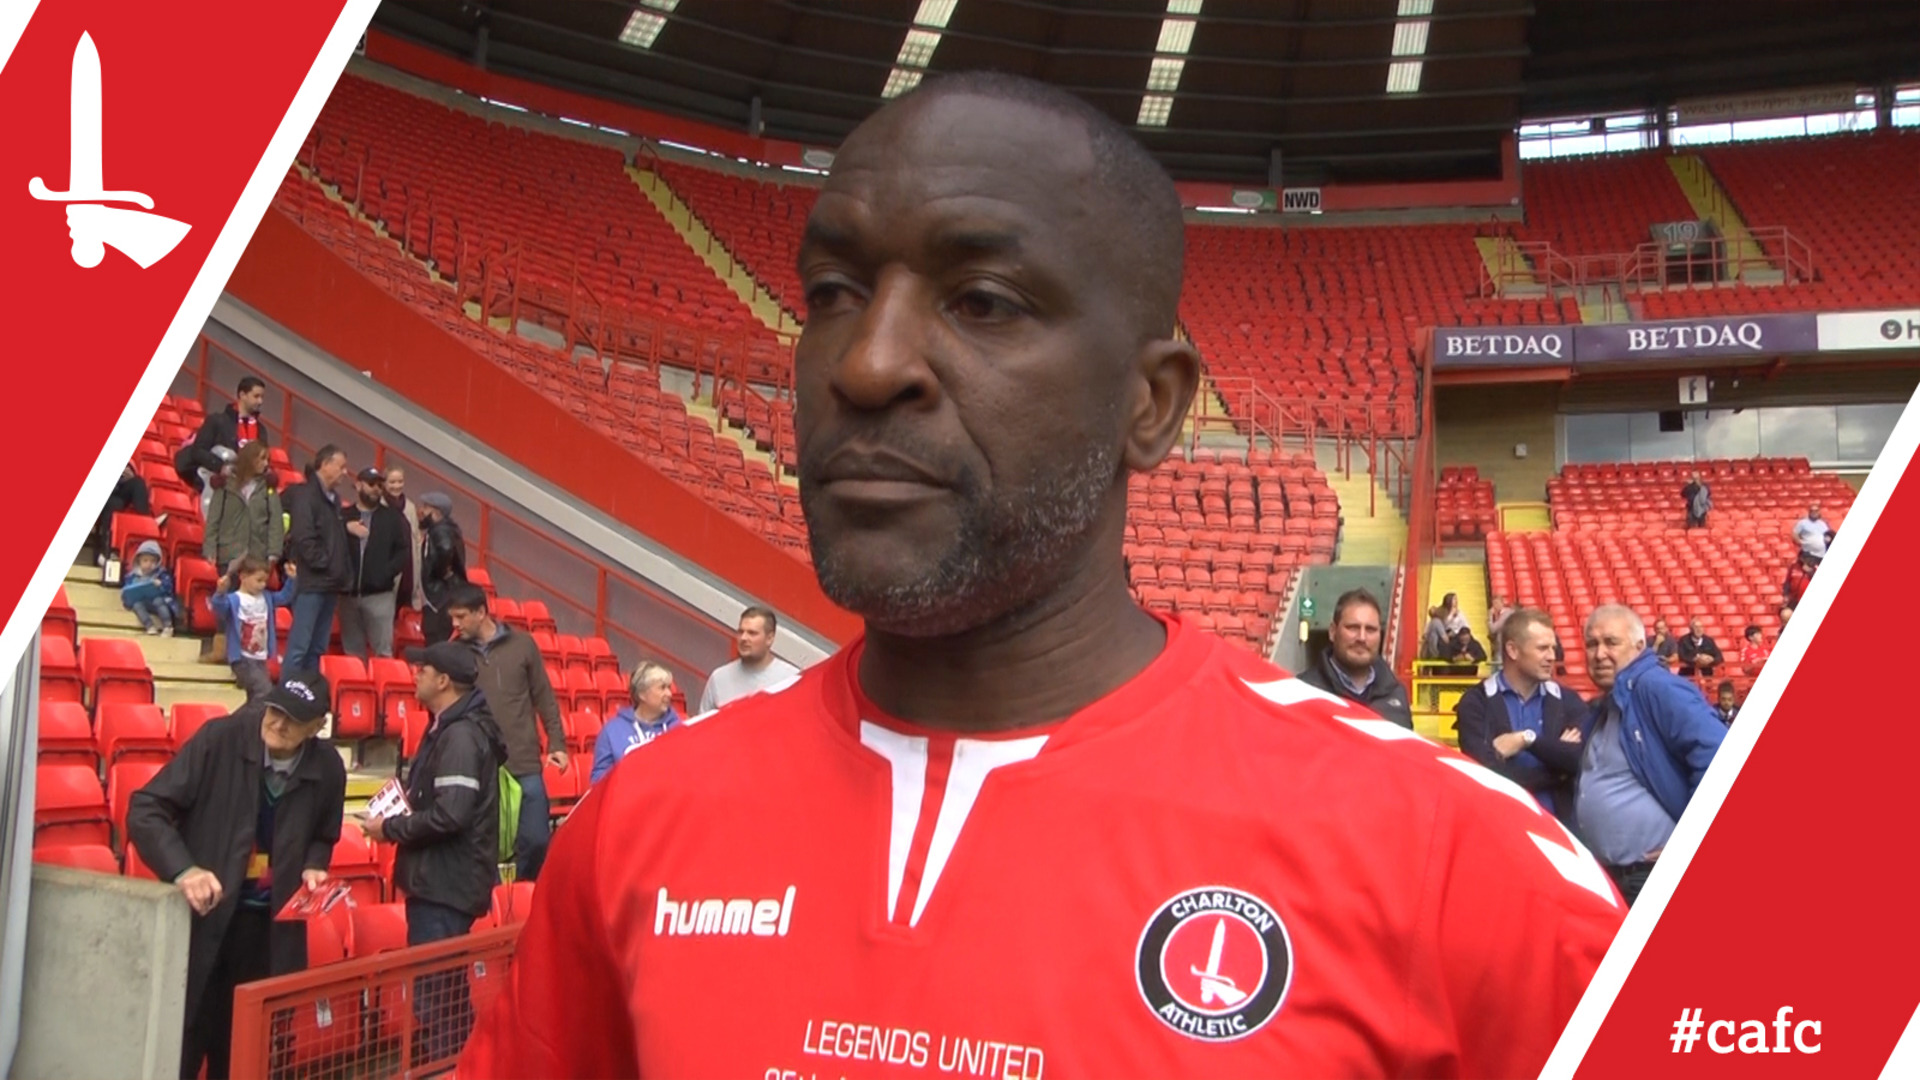 LEGENDS UNITED | Chris Powell proud to play a part in Charlton's history